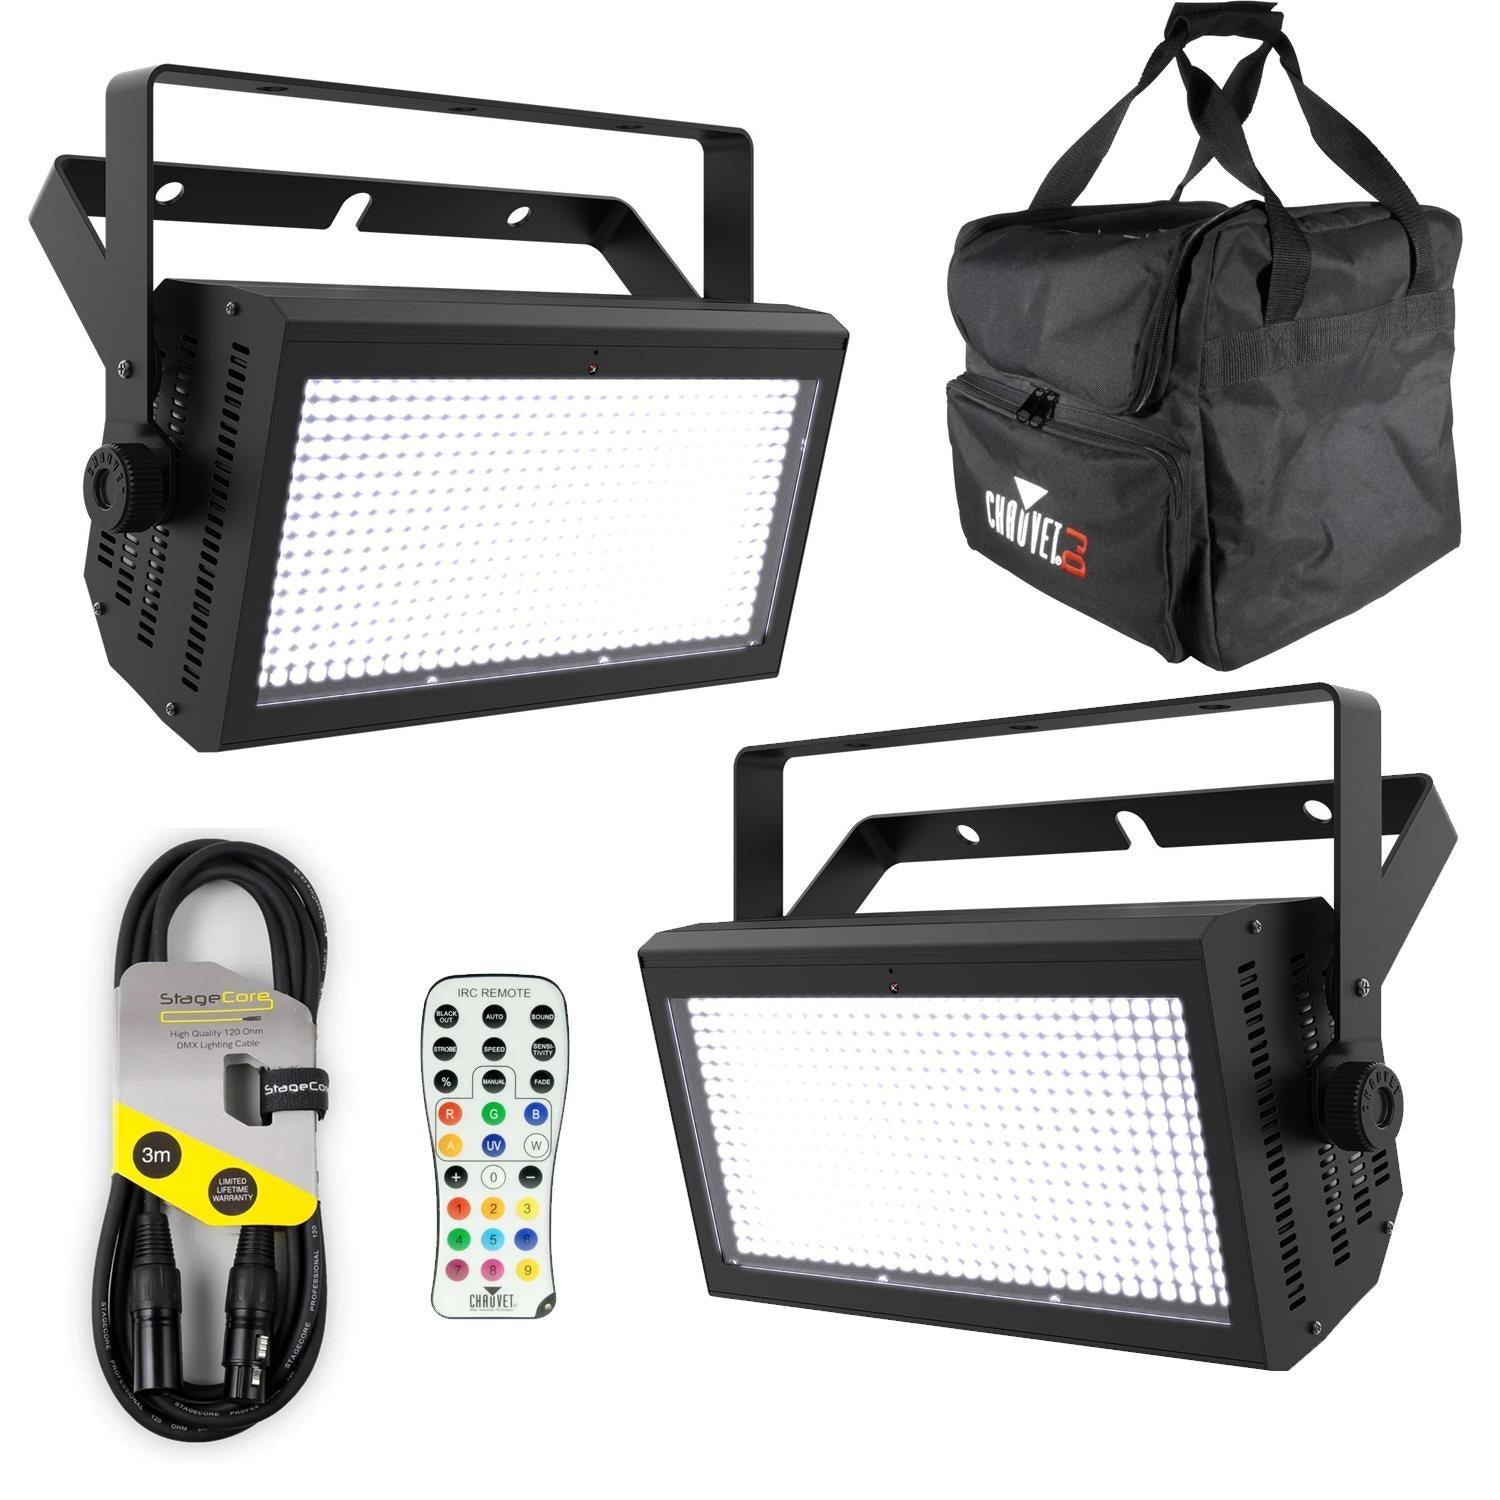 2 X Chauvet DJ Shocker Panel 480 Blinder Strobe Effect Light with DMX Cable, Bag and Remote - DY Pro Audio